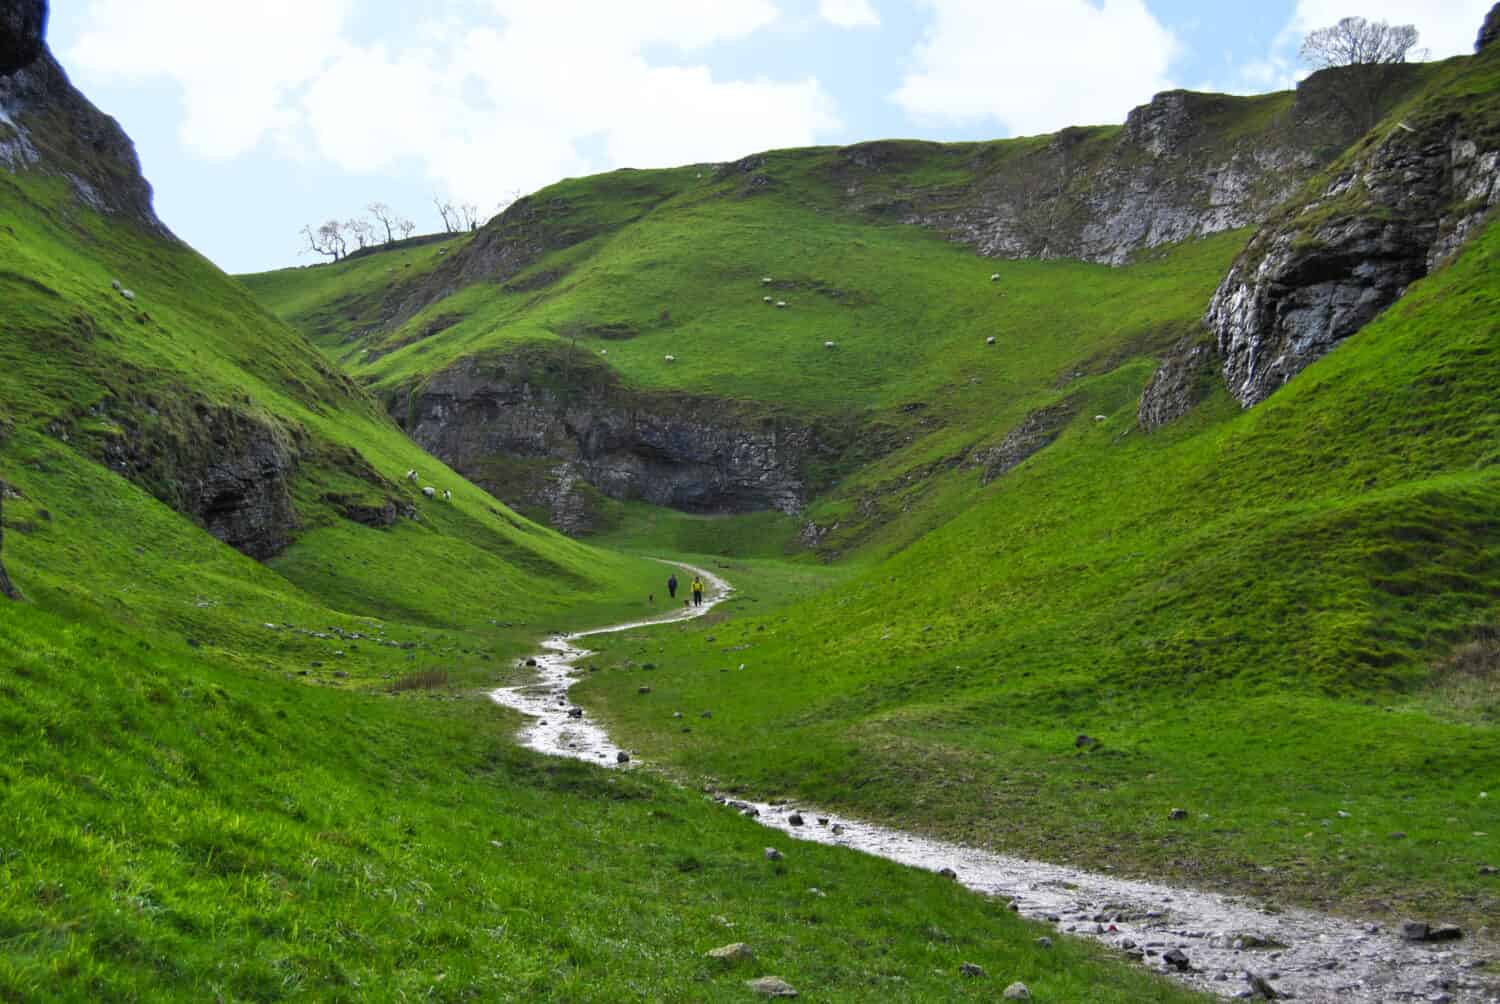 Cave Dale dry limestone deep valley landscape power of water Erosion stream outdoor activity natural tourist trail Steep Rocks Narrow Pass Staffordshire Yorkshire Derbyshire Peak District UK 1/2016